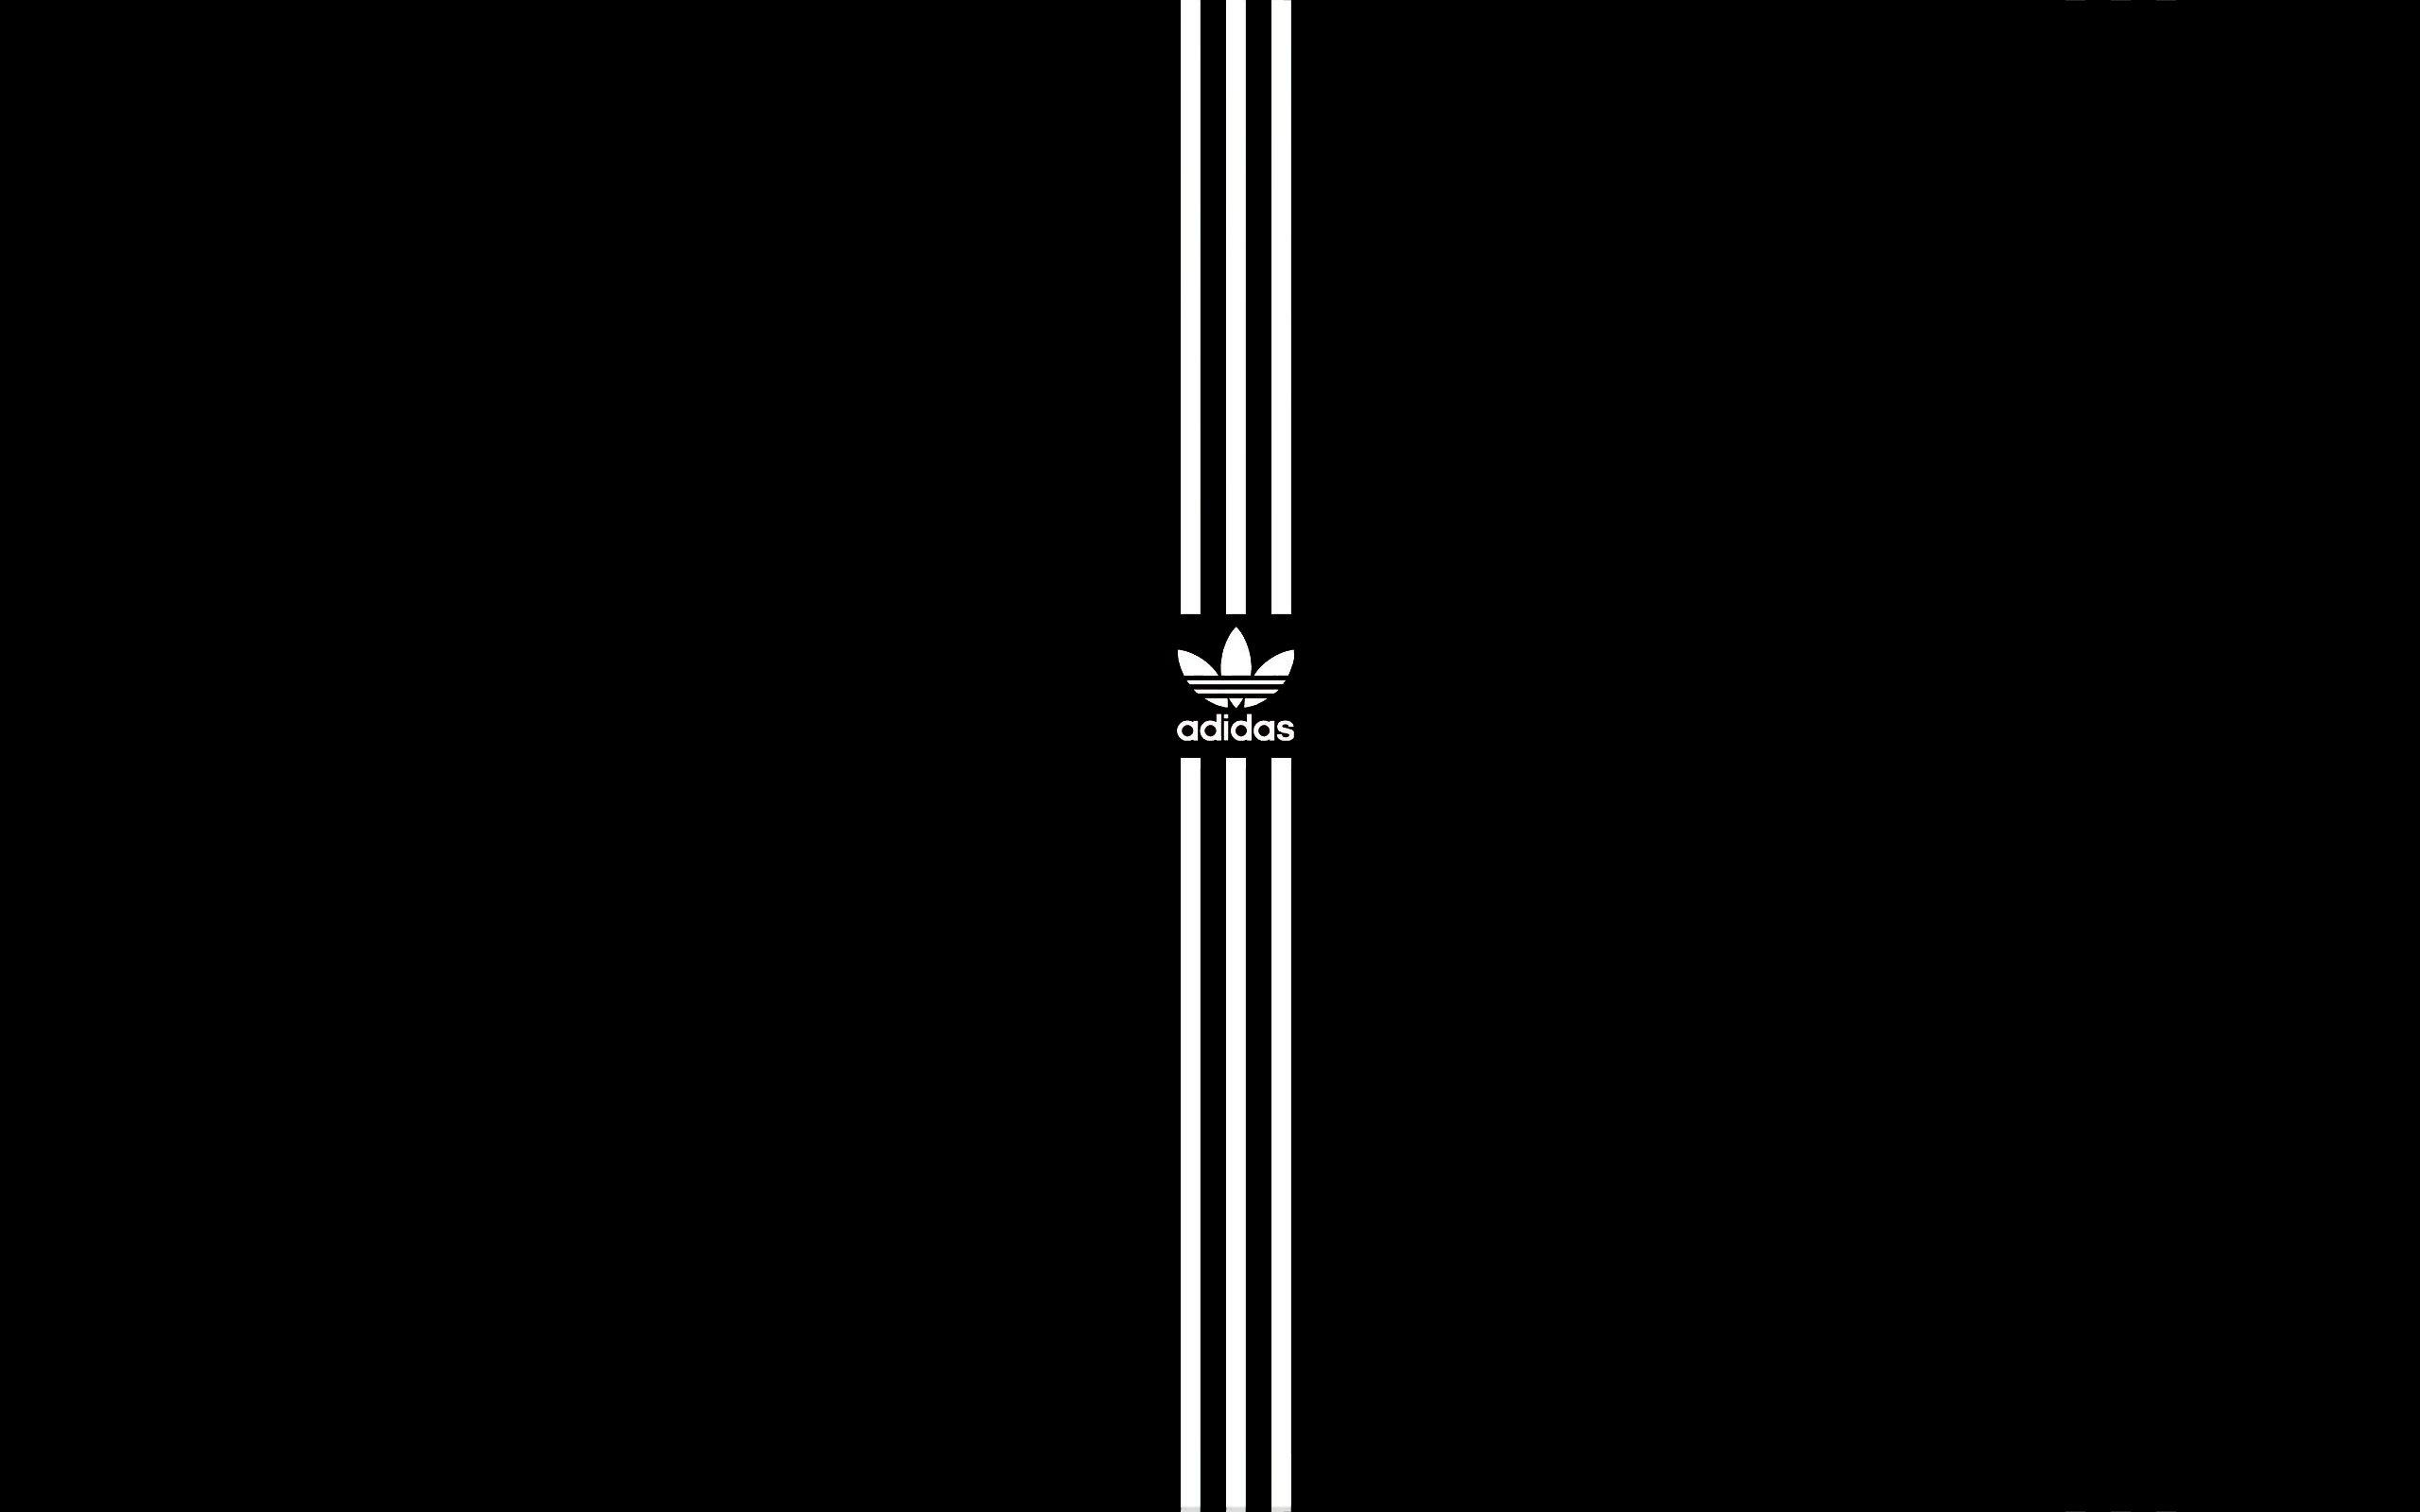 Free Download Adidas Wallpapers 16 2560x1600 For Your Desktop Mobile Tablet Explore 100 Adidas Wallpaper 16 Adidas Wallpaper 16 Adidas 16 Wallpaper Adidas Logo Wallpaper 16